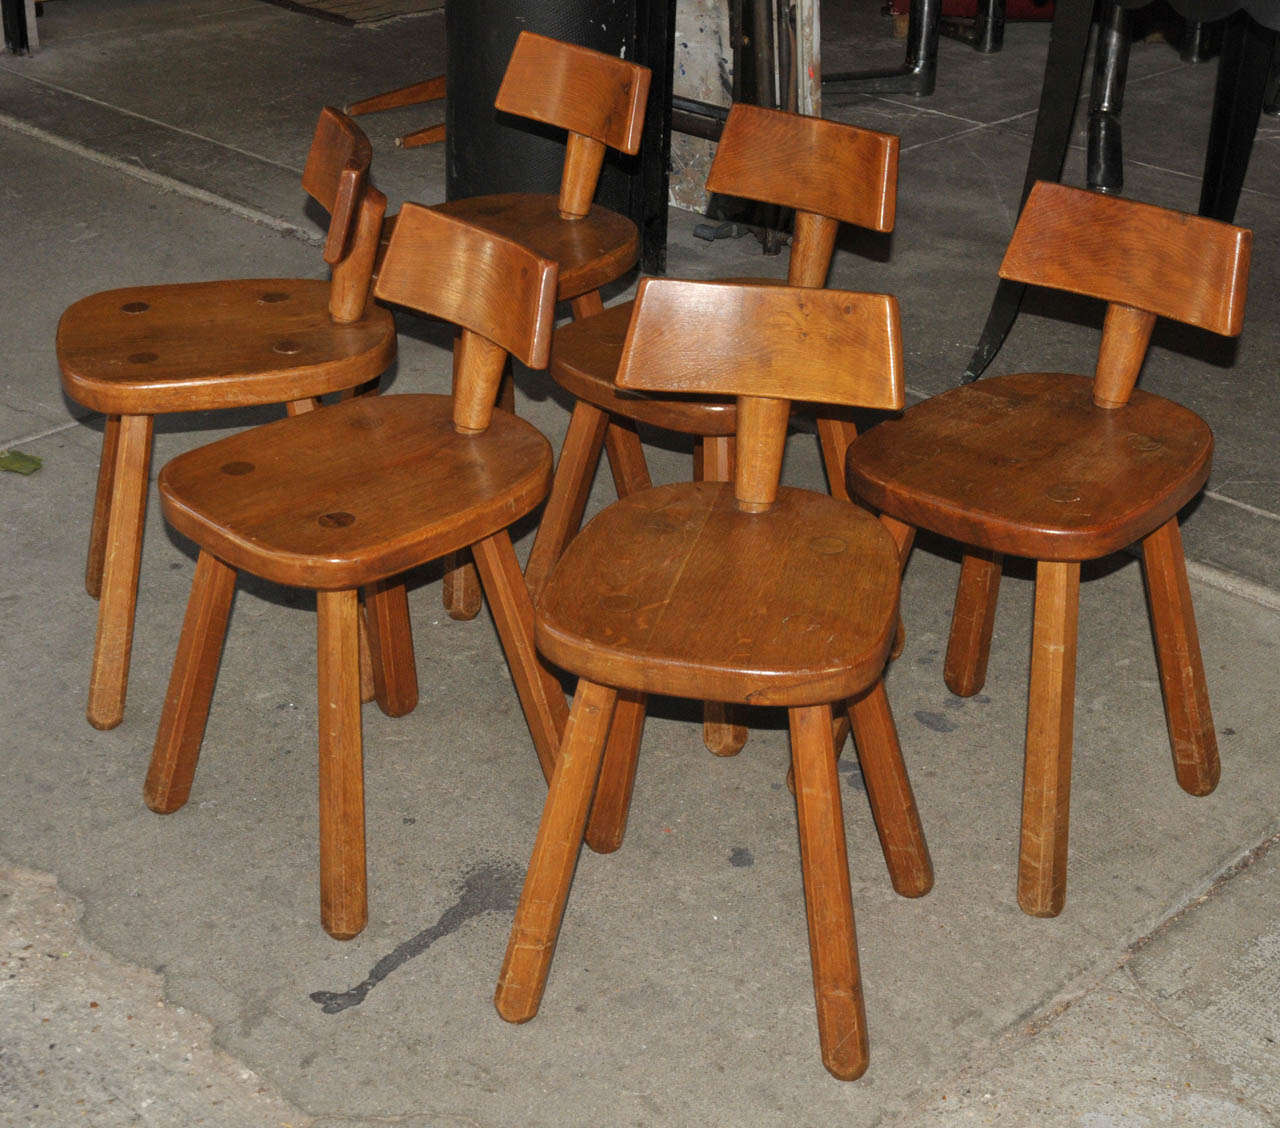 Set of six 1960's solid oak chairs. Some scratches and some wear. Good condition. Normal wear consistent with age and use.